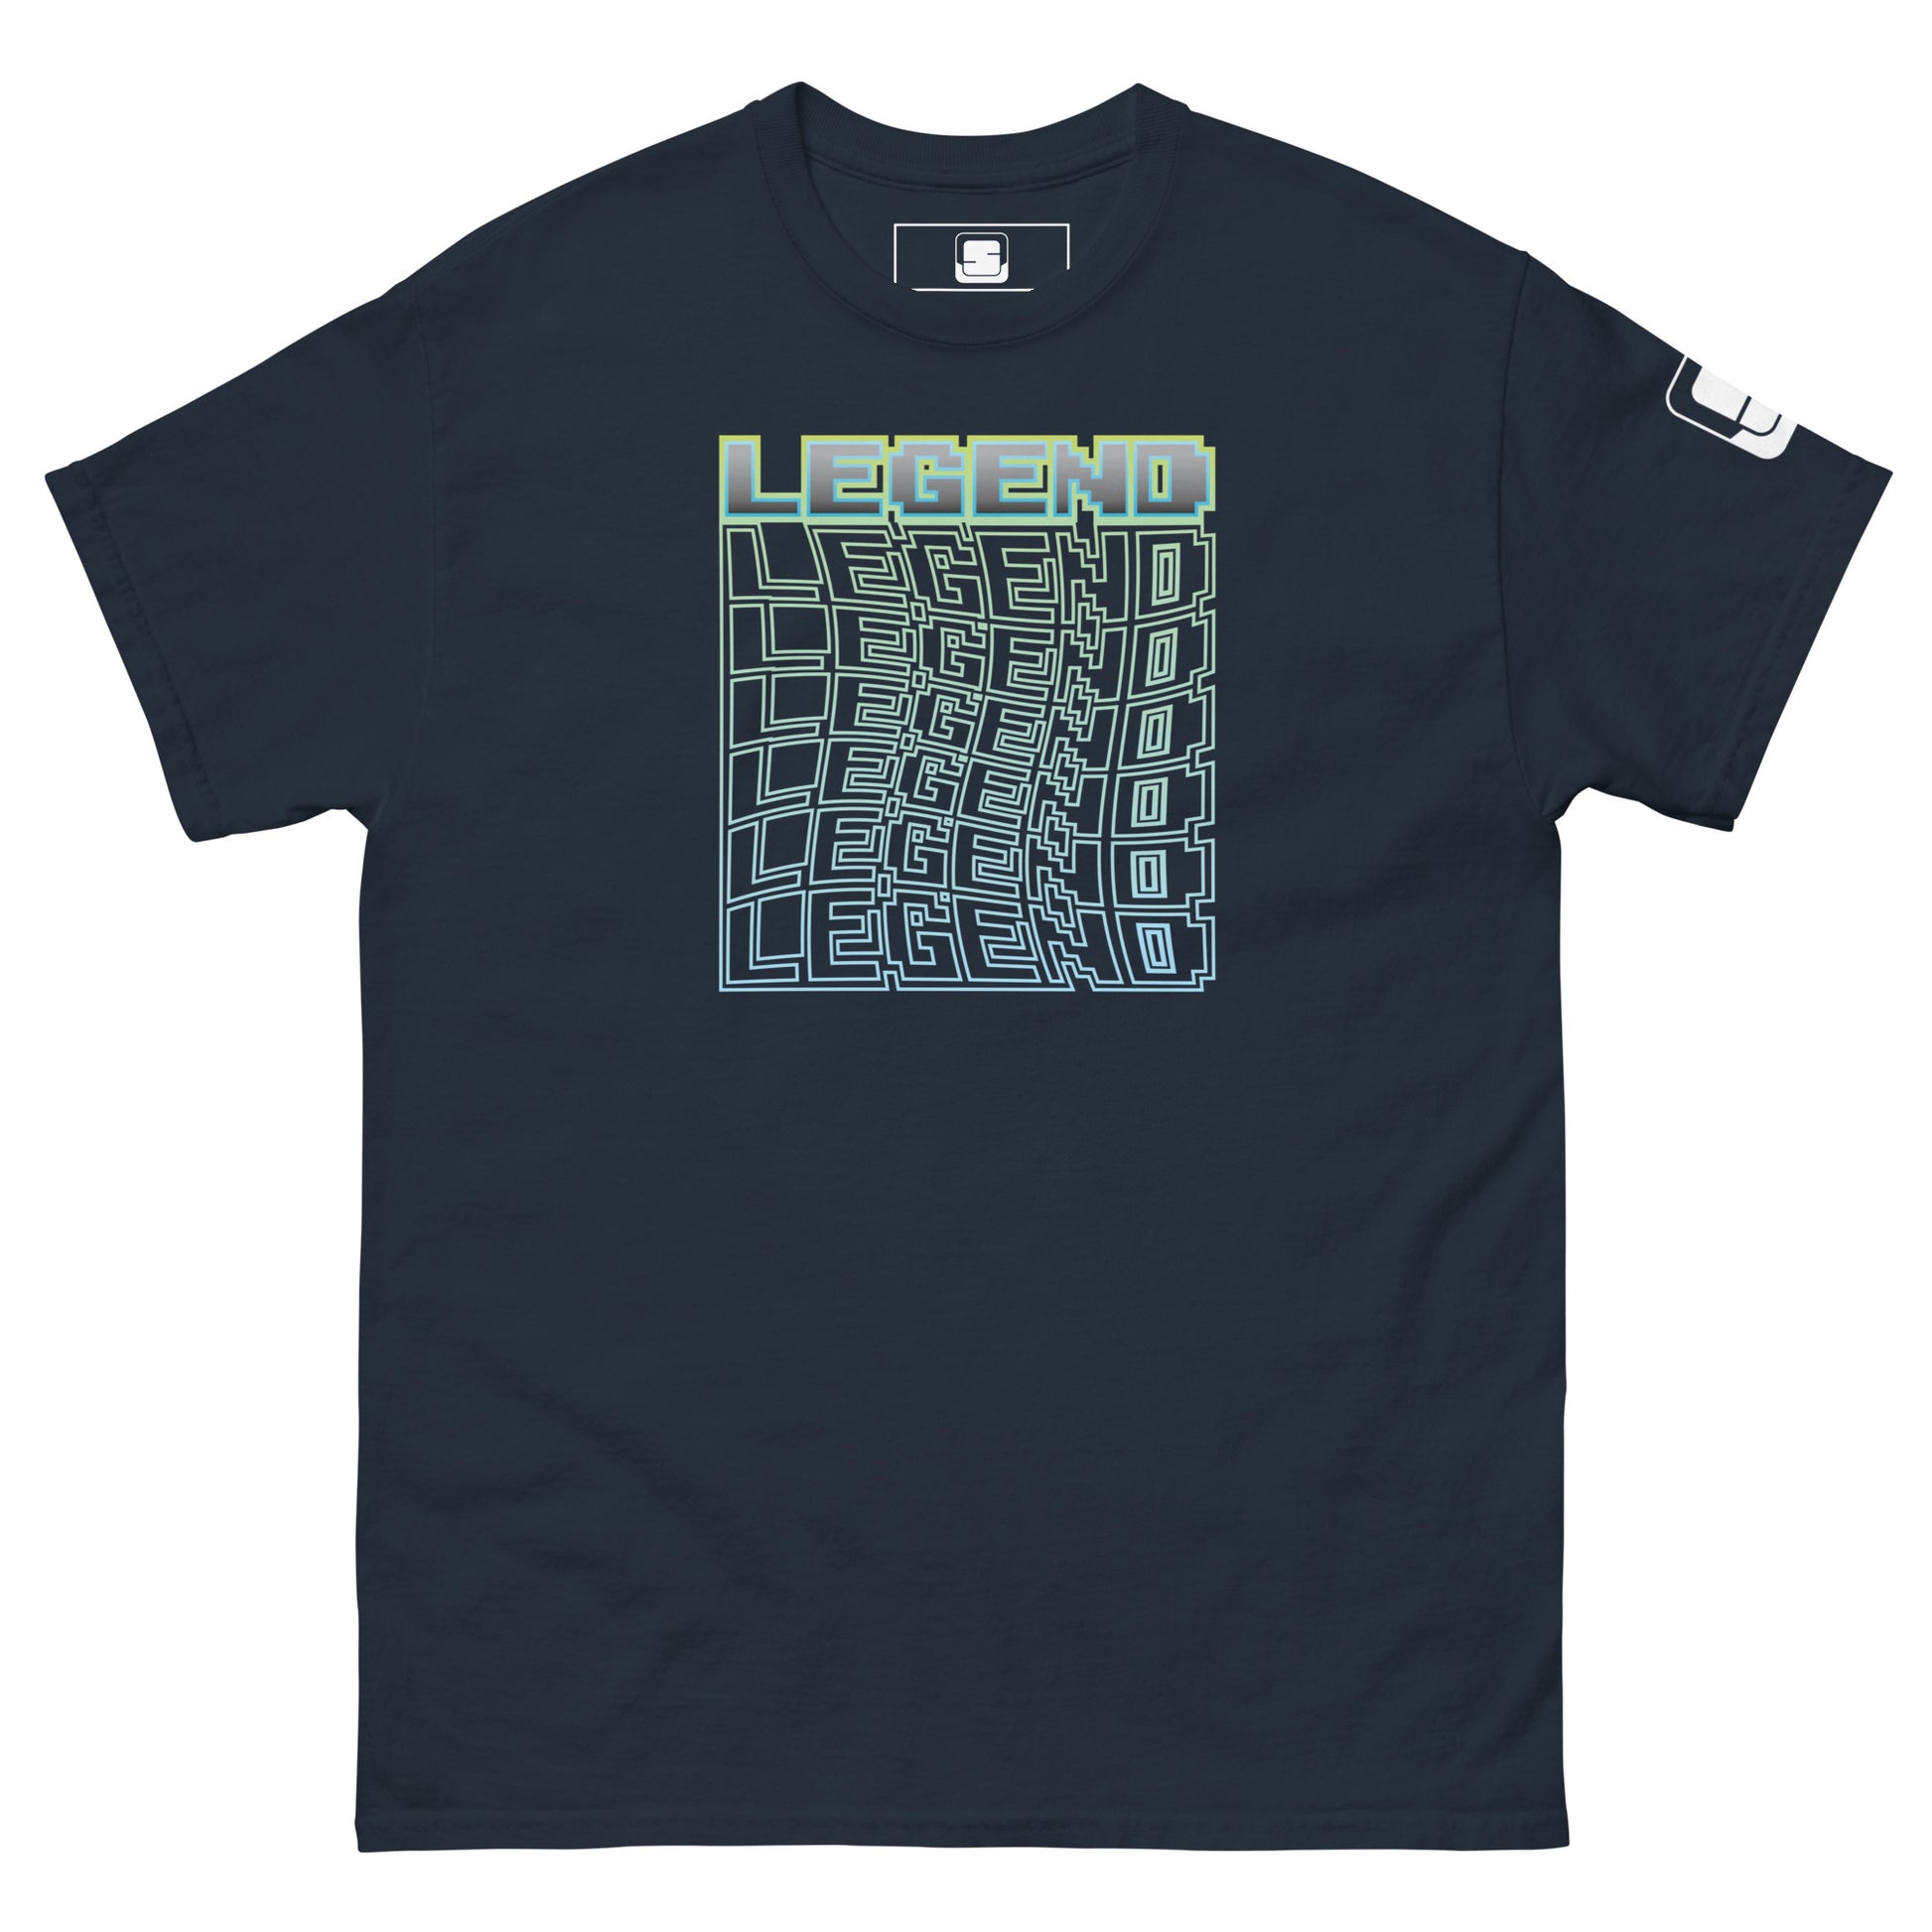 navy t-shirt laid flat, showcasing a green-to-blue gradient 'LEGEND' text in a 3D cube illusion design, with a logo tag on the sleeve, against a clean white background.